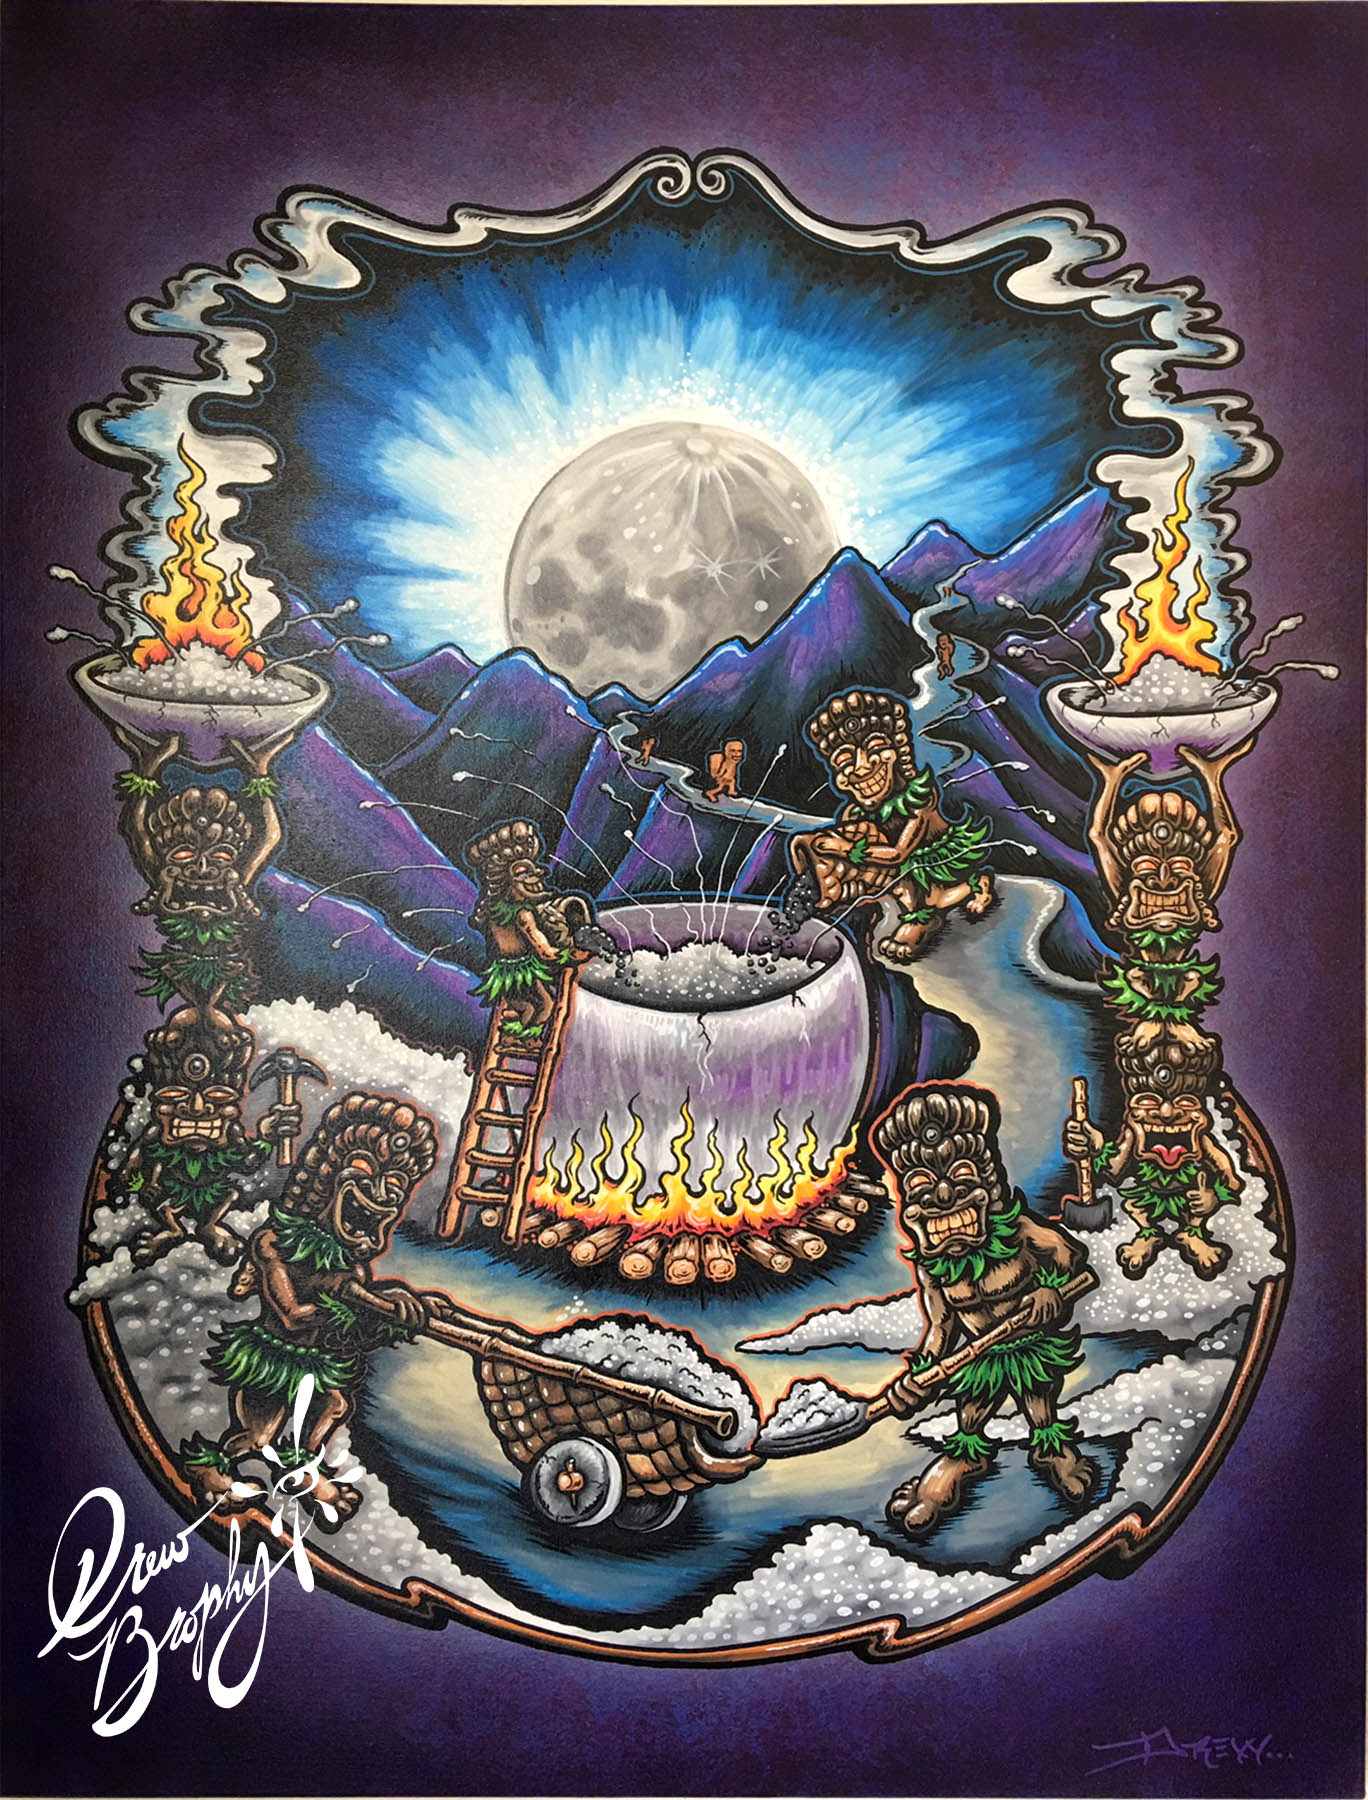 MOONLIGHT TIKIS 40" x 30" Original painting on Canvas by Drew Brophy - EARTH SERIES